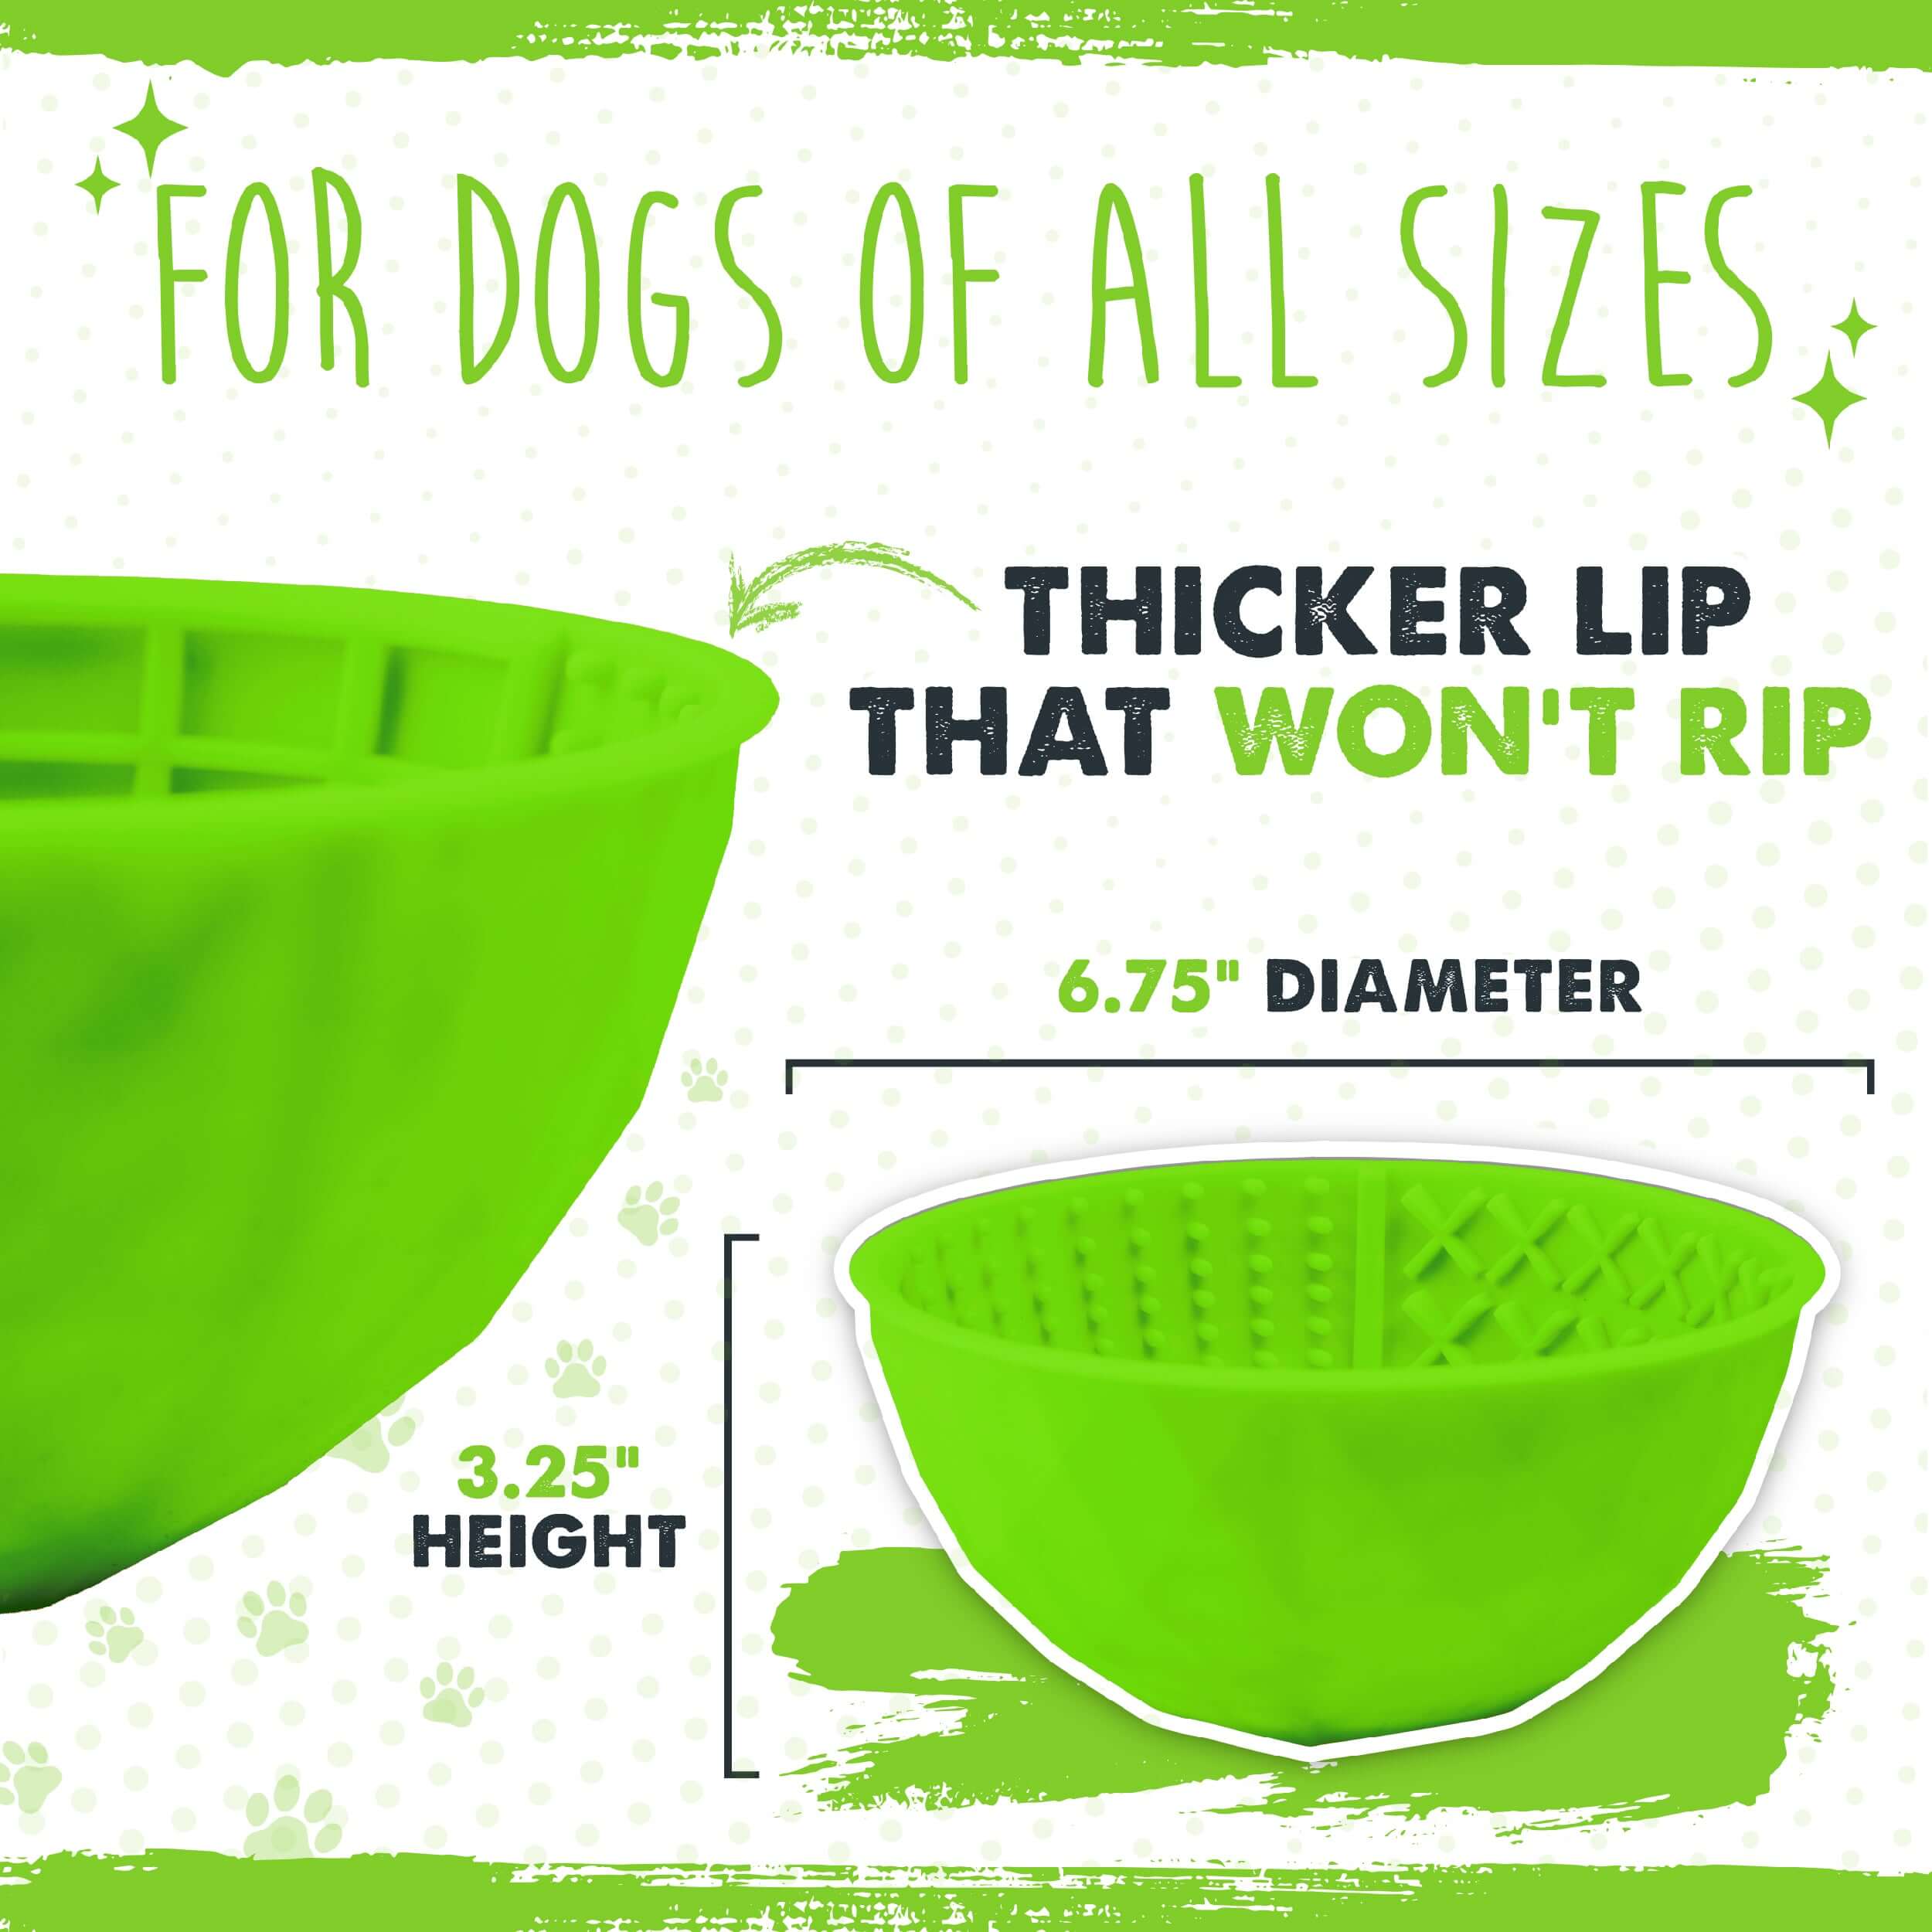 Mighty Paw Interactive Dog Lick Bowl: Mental Enrichment for Mealtime